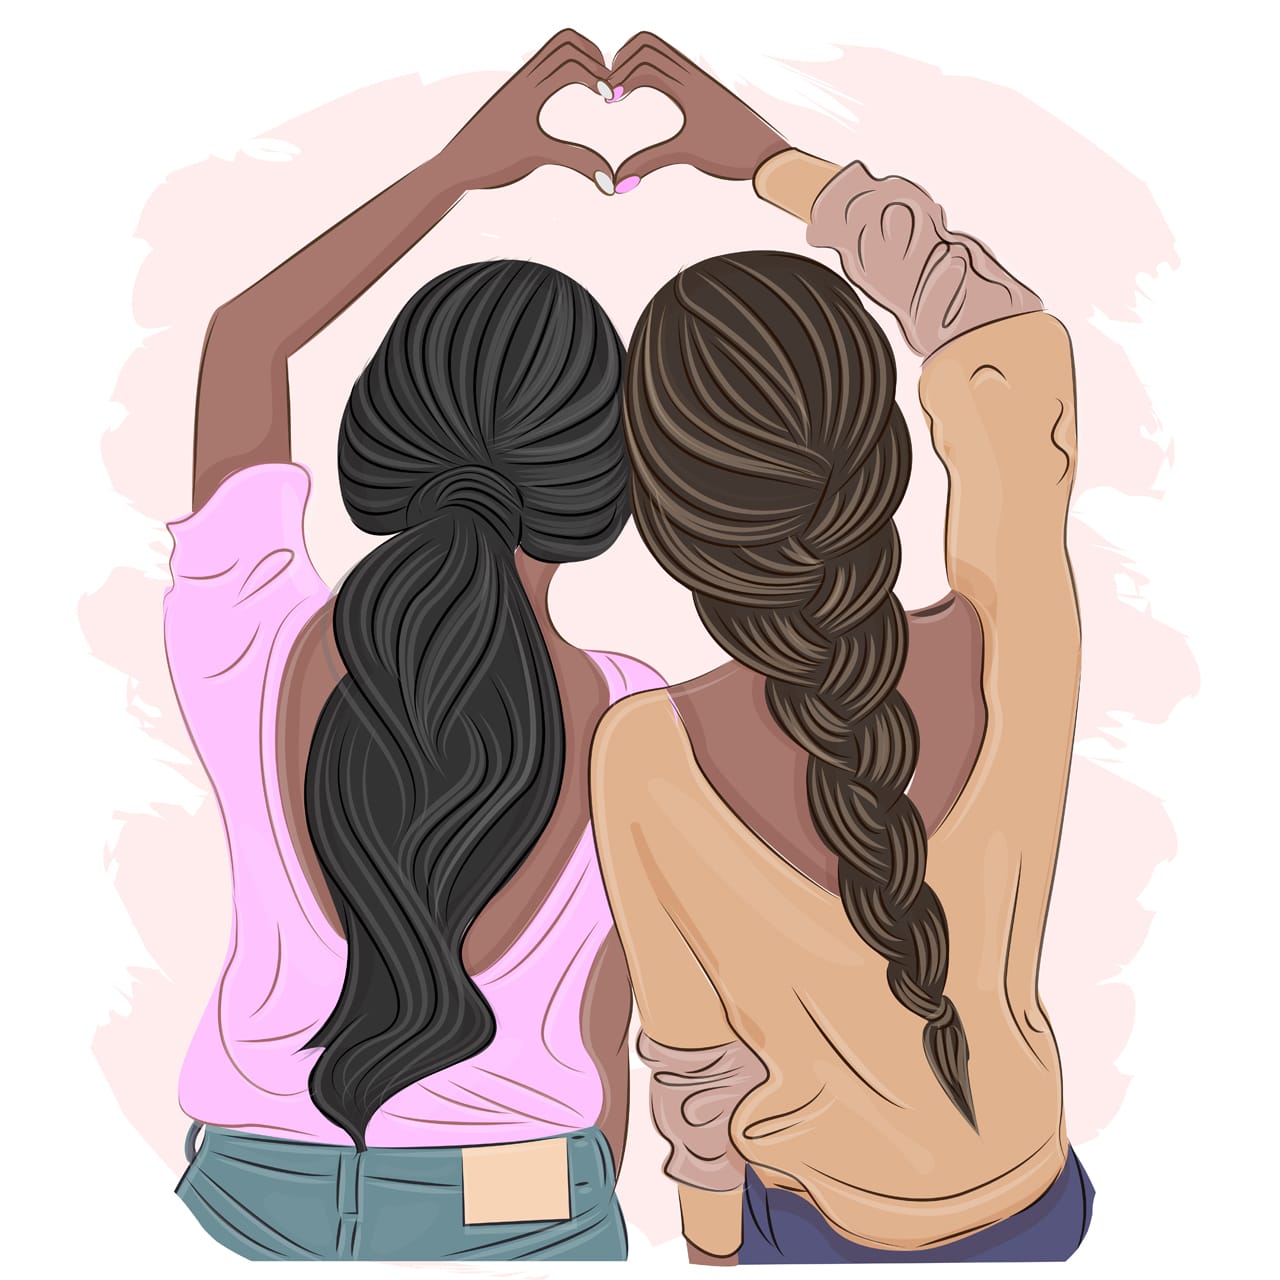 My family clipart two sisters show with hands heart view from back friendship concept fashion print